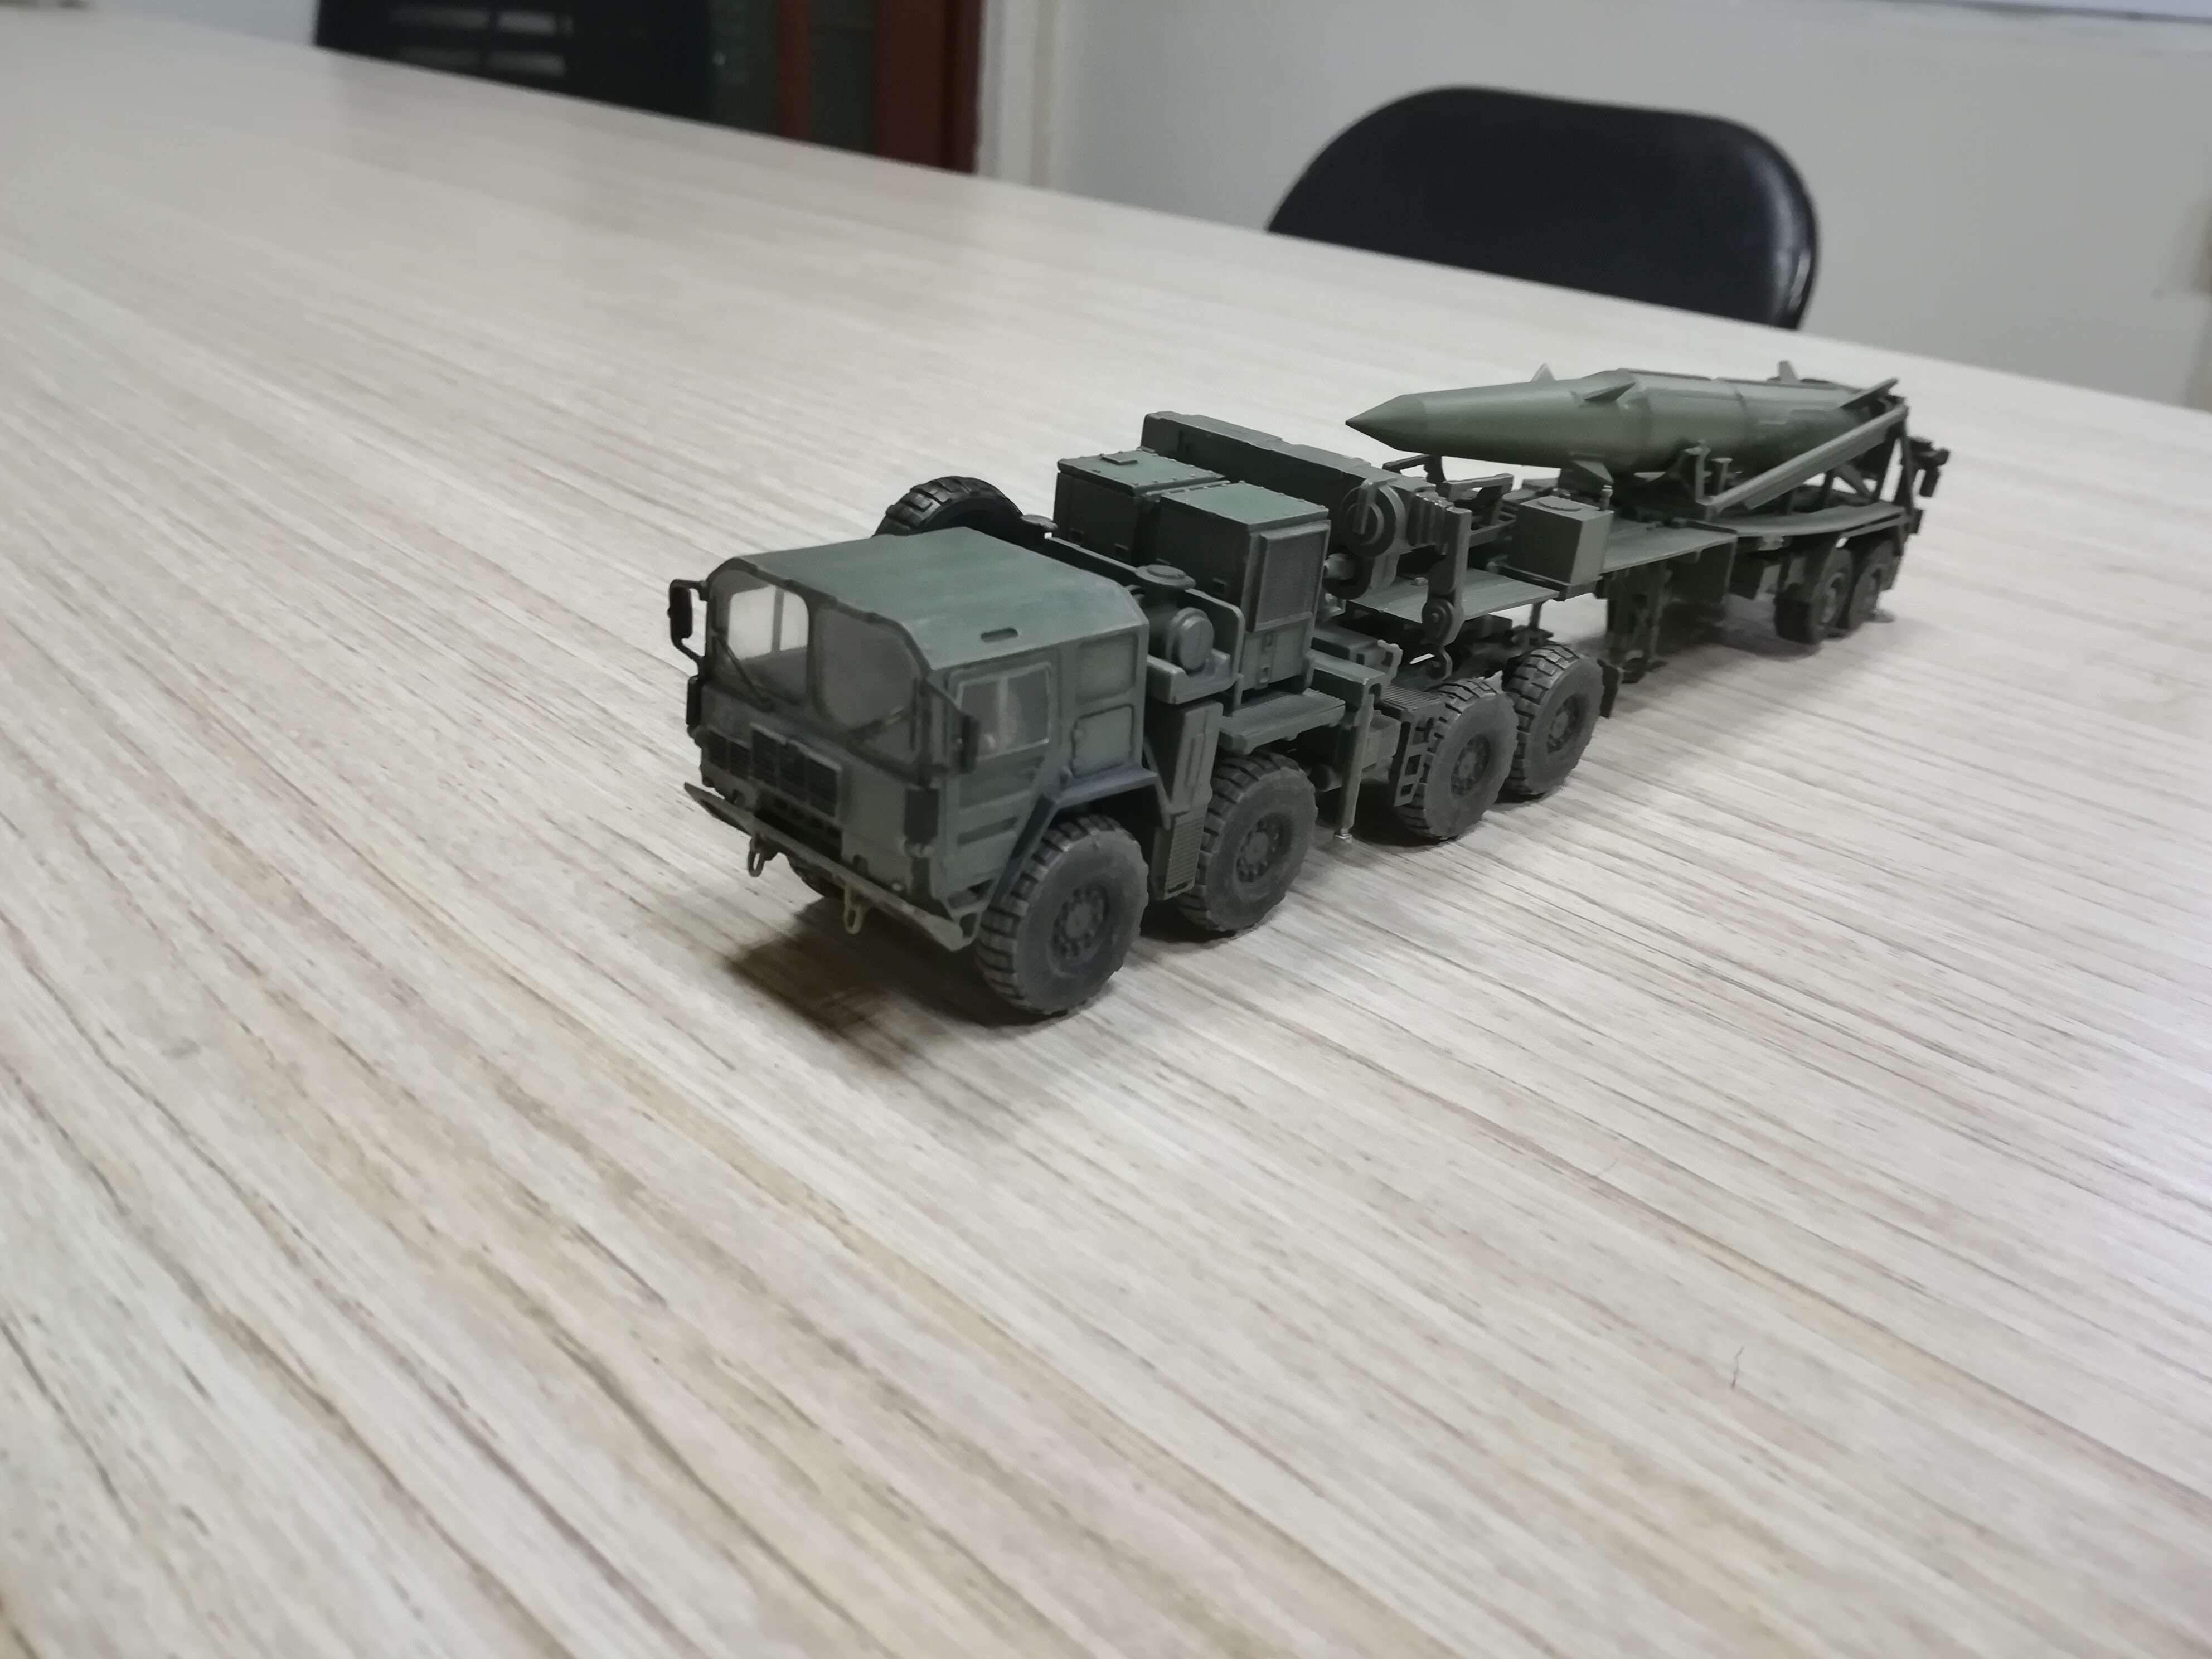  Modelcollect US Army M1001 Tractor et missile tactique Pershing II, 1